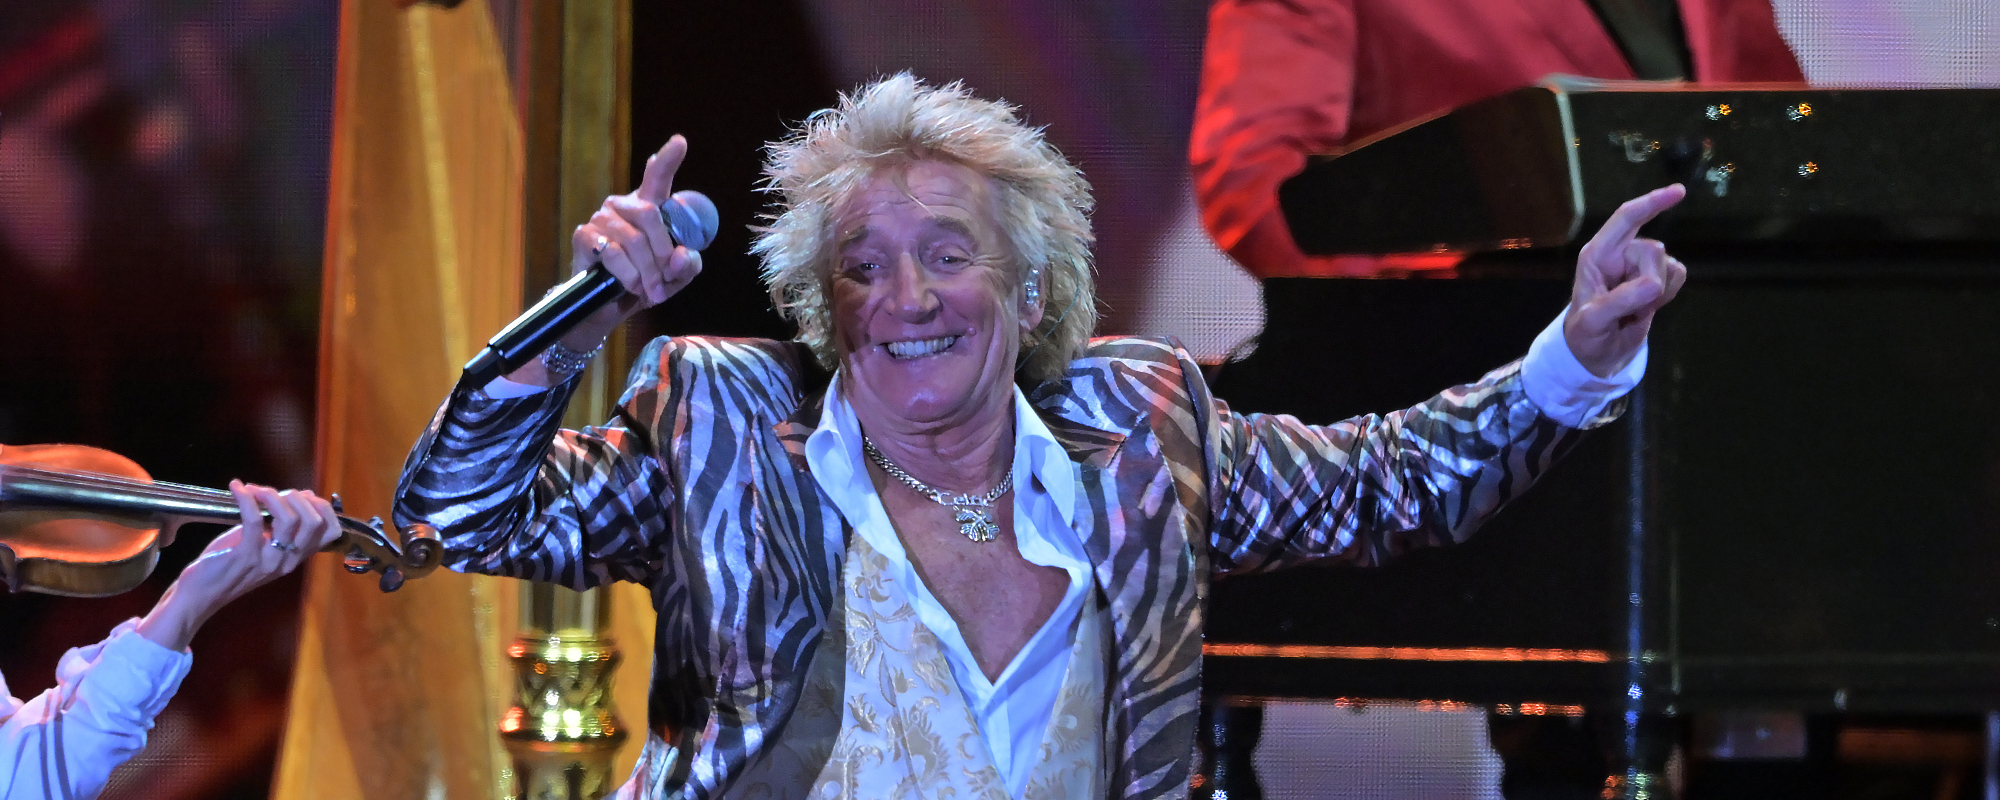 Rod Stewart Claims New Album Will Be A “Difficult Sale” at First, but Promises You Will “Get Hooked”